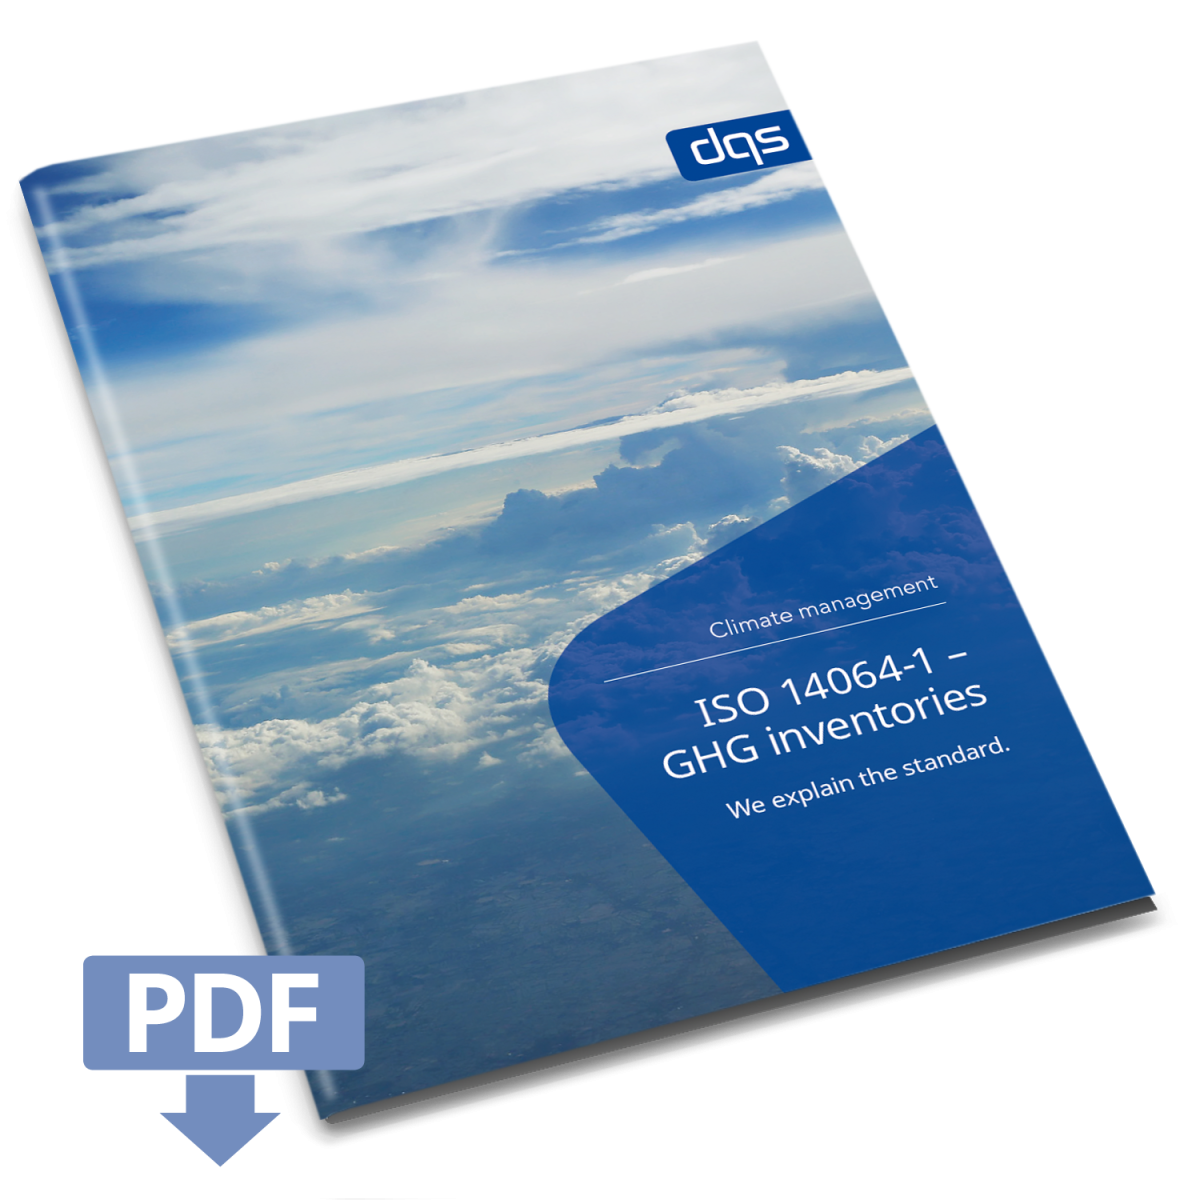 iso-14064-1-ghg-inventories-dqs-whitepaper-free.png